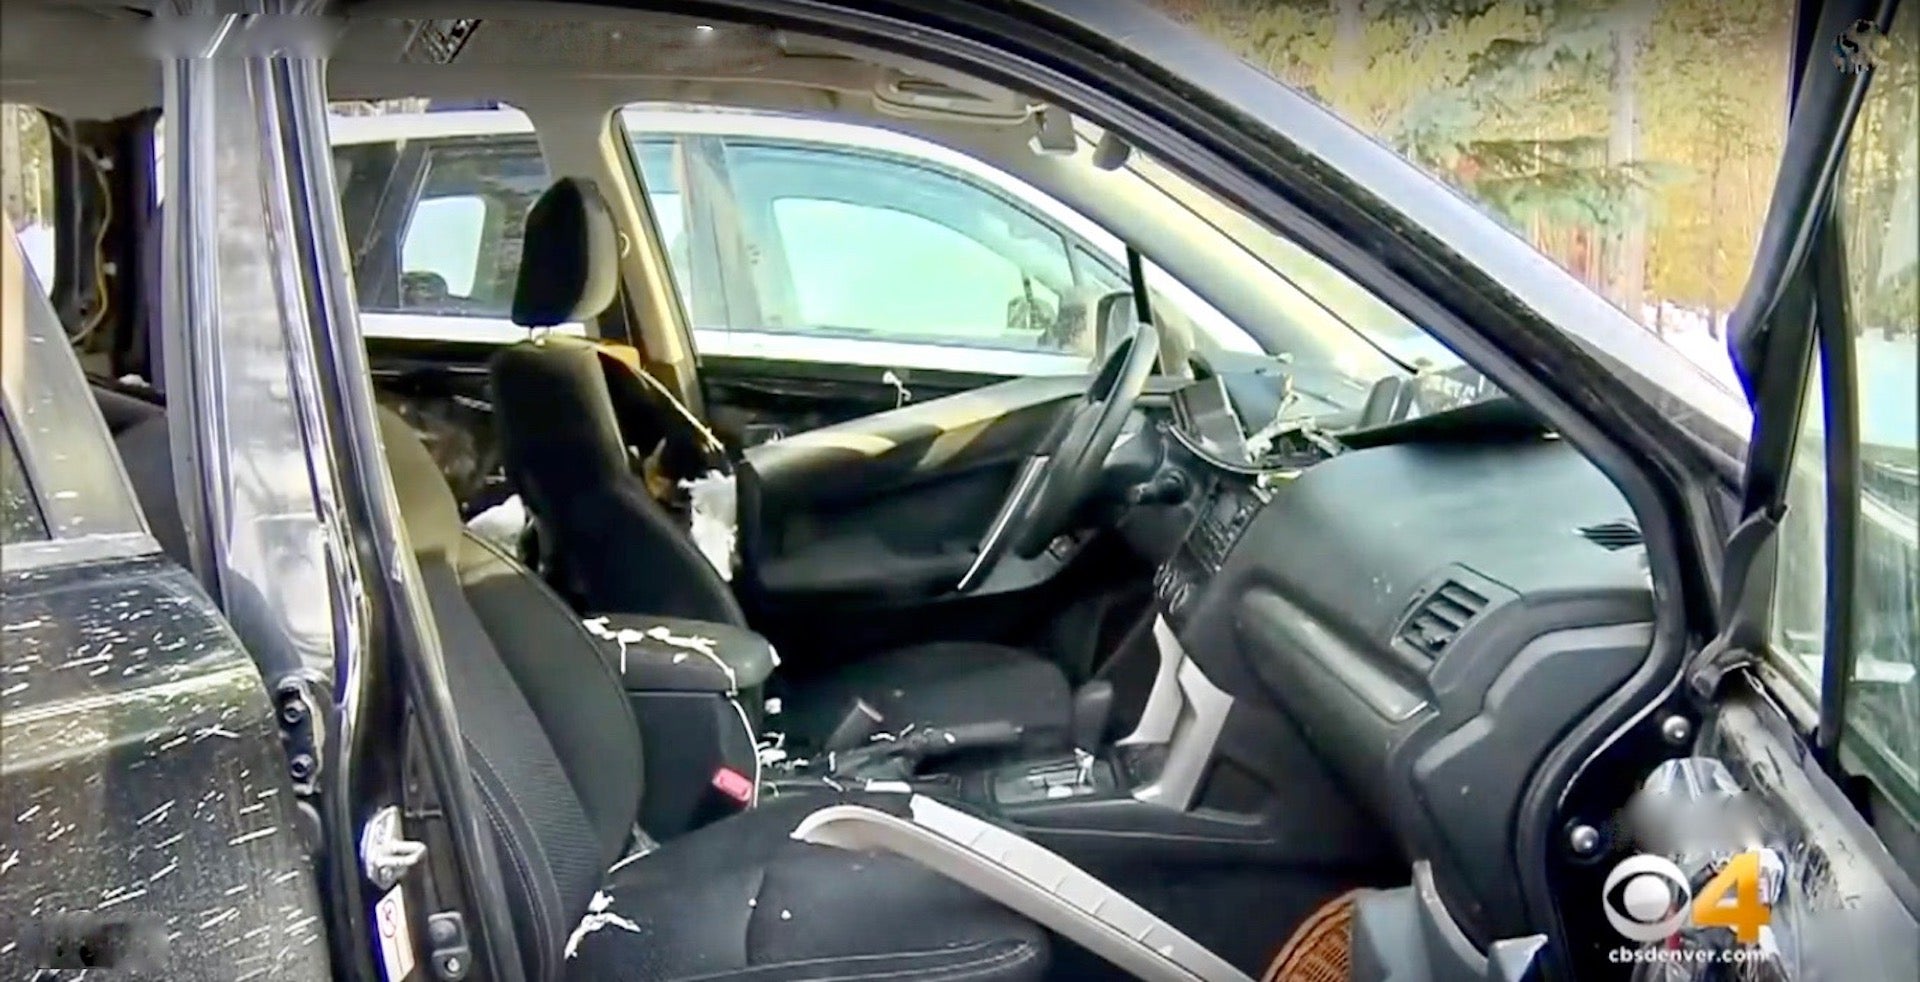 Naughty Bear Trashes 2014 Subaru Forester In Search For Gummy Bears, Poops In Back Seat